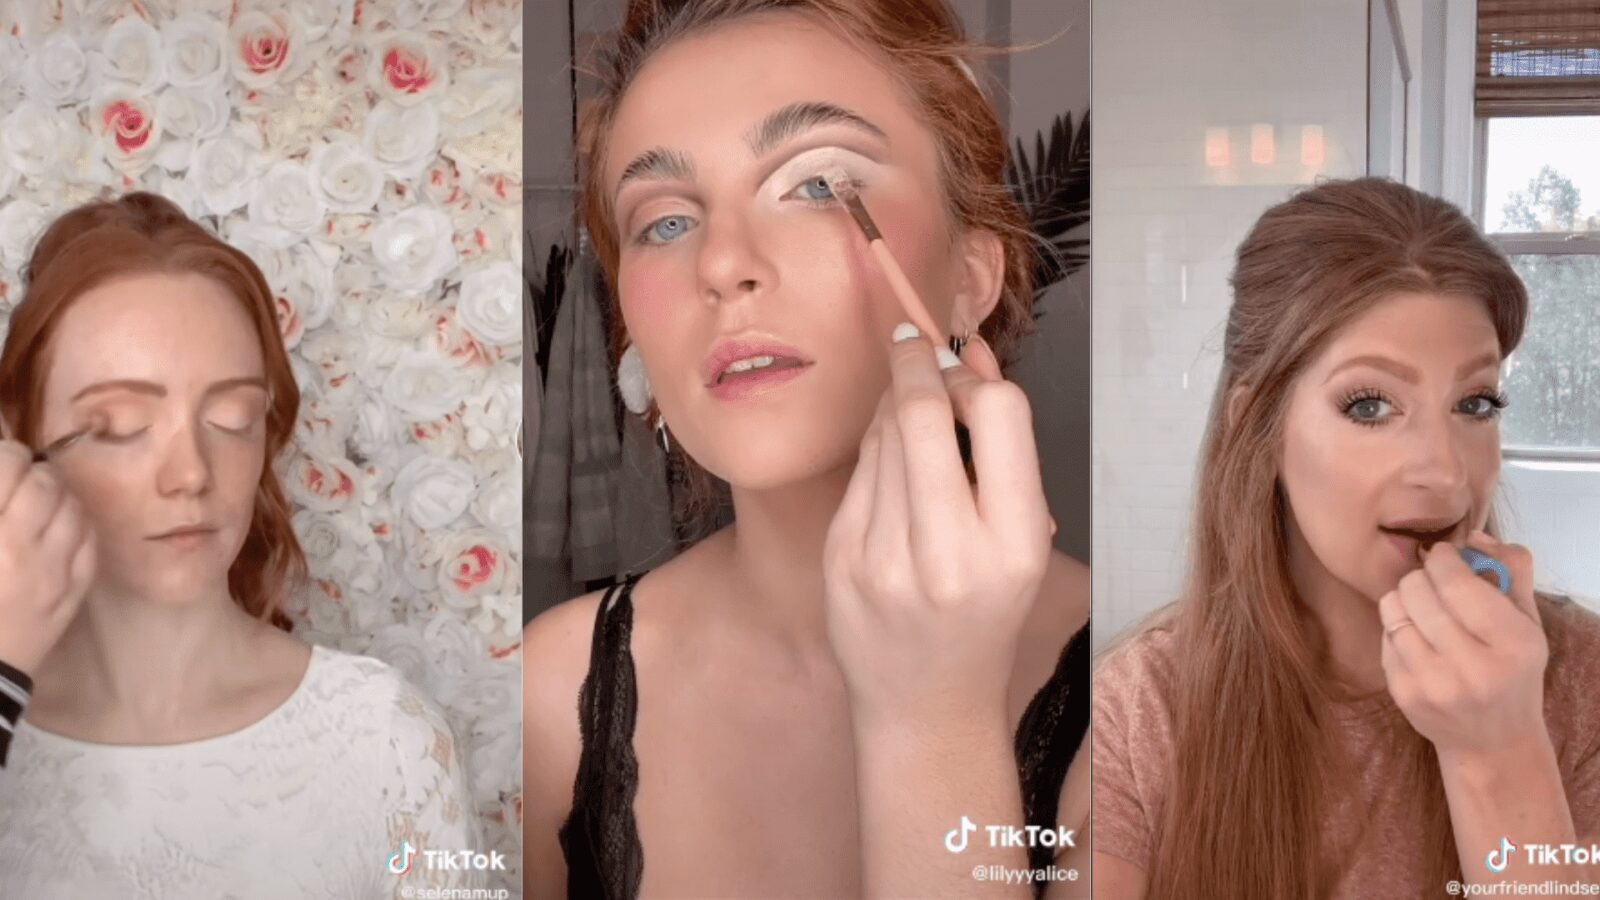 5 Glam Redhead Makeup Tutorials For a Wedding or Special Event